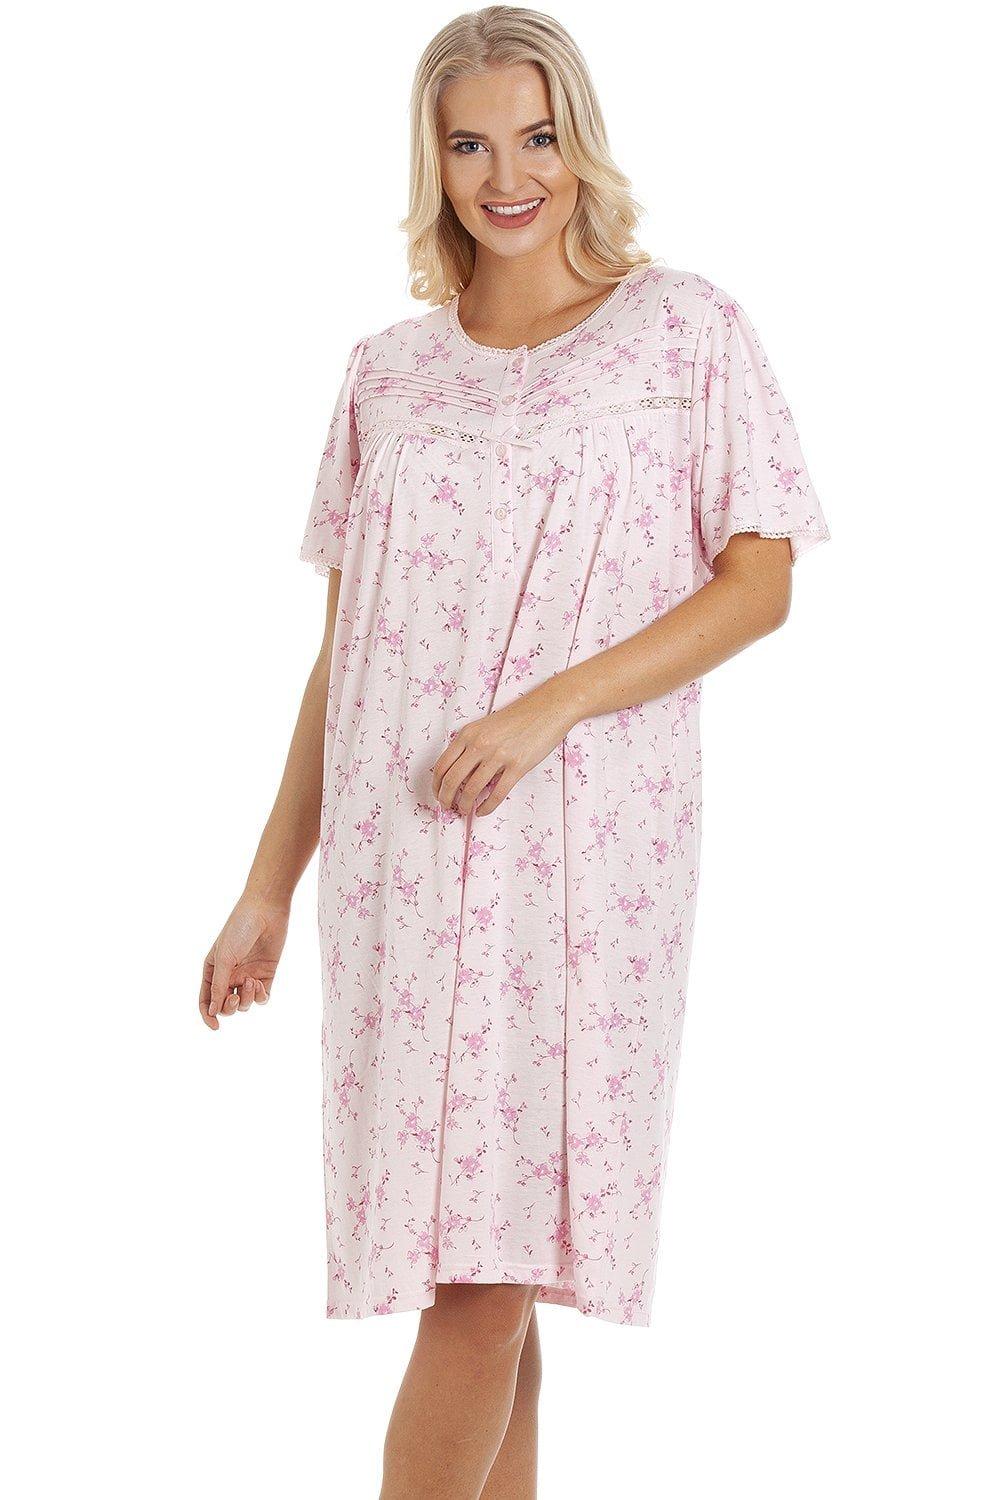 Classic Short Sleeve Floral Nightdress